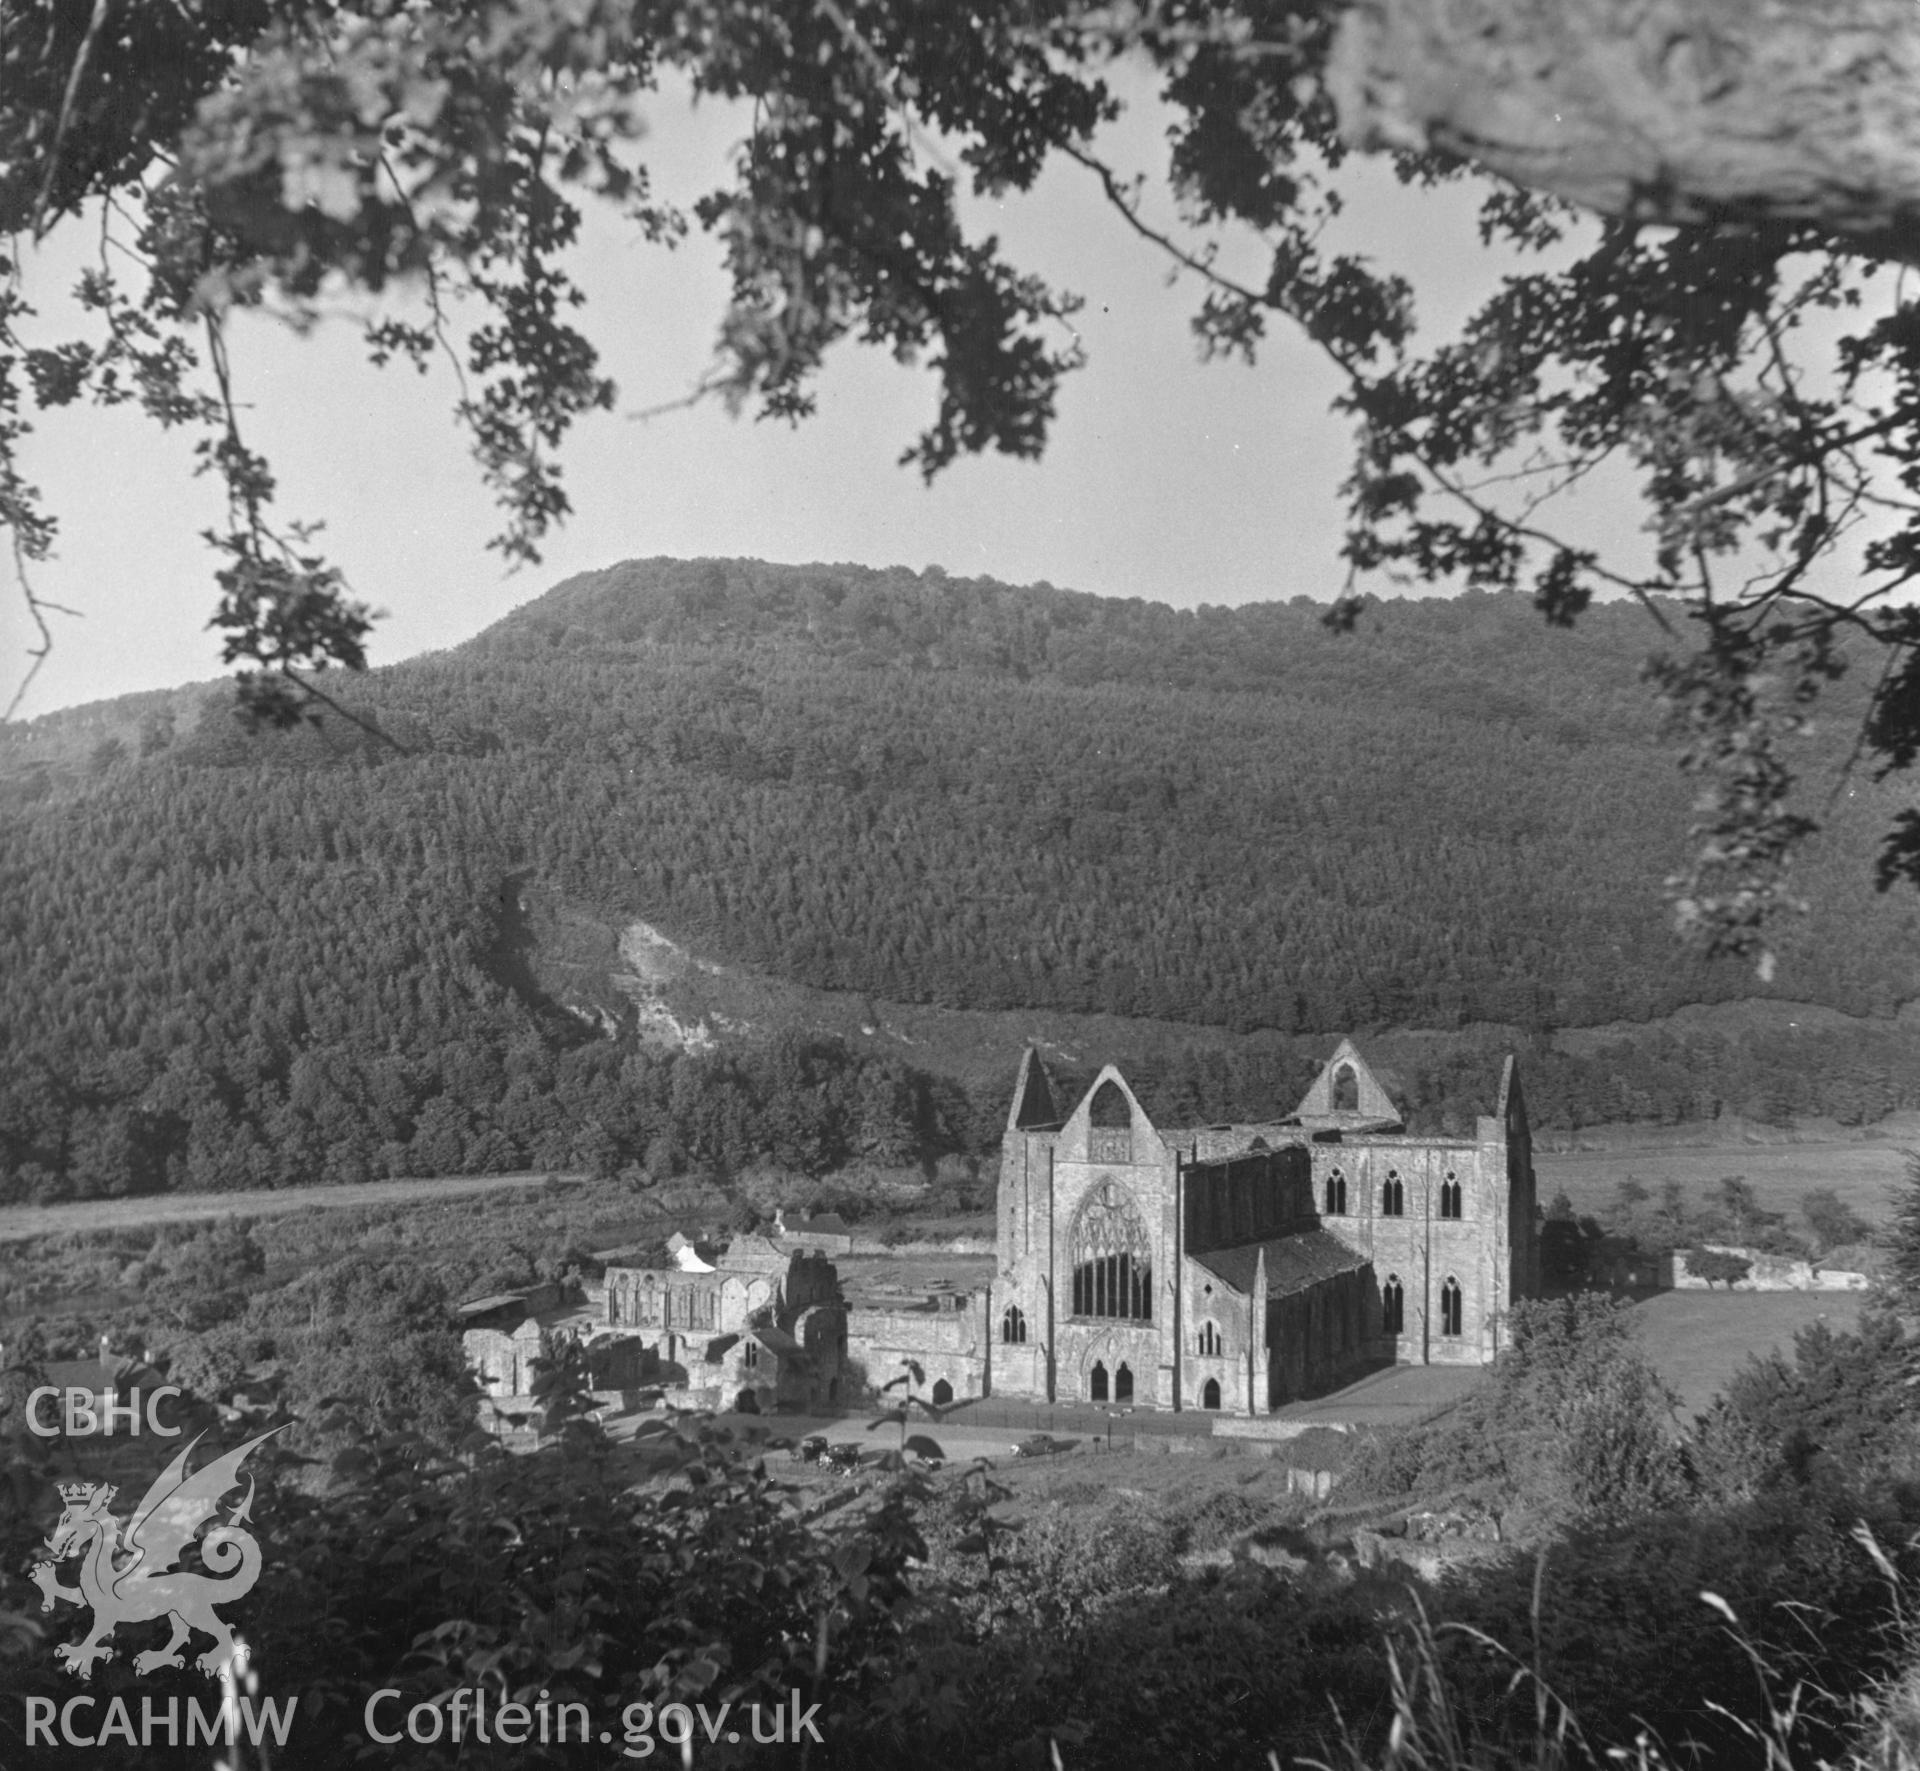 Digital copy of a landscape view of the Abbey taken by B & N Westwood, dated 1948.